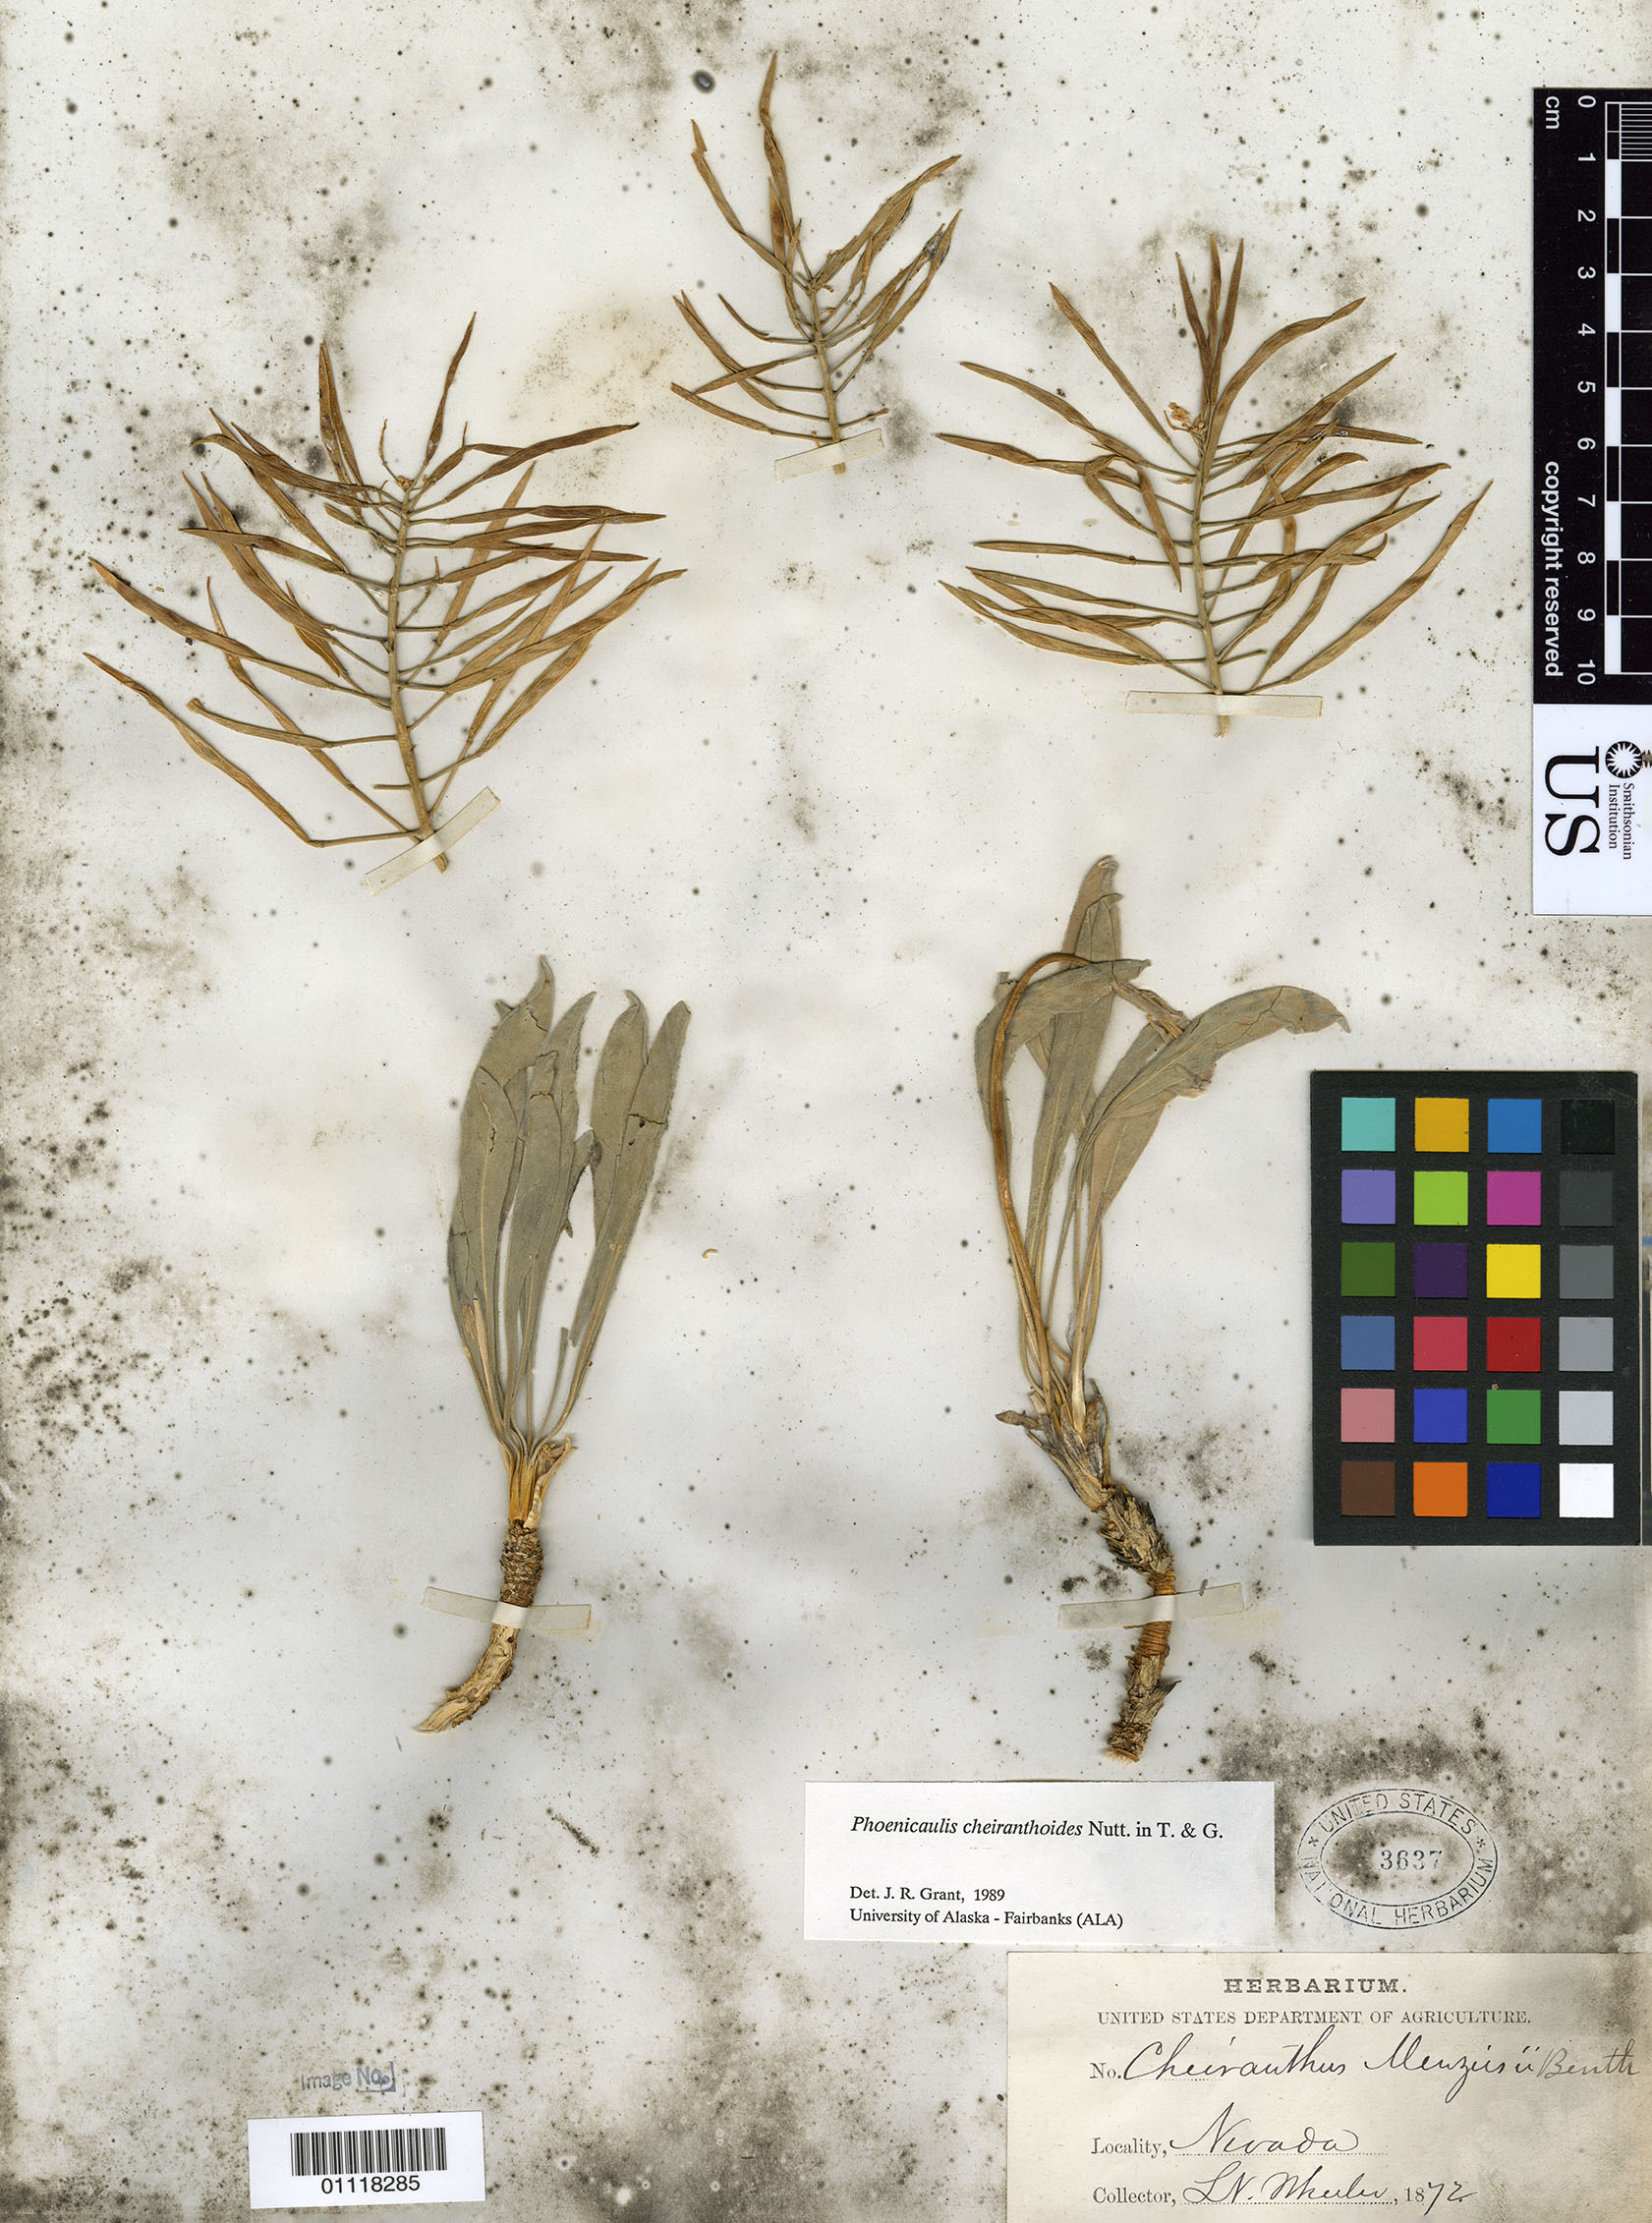 Page with several small plant specimens affixed